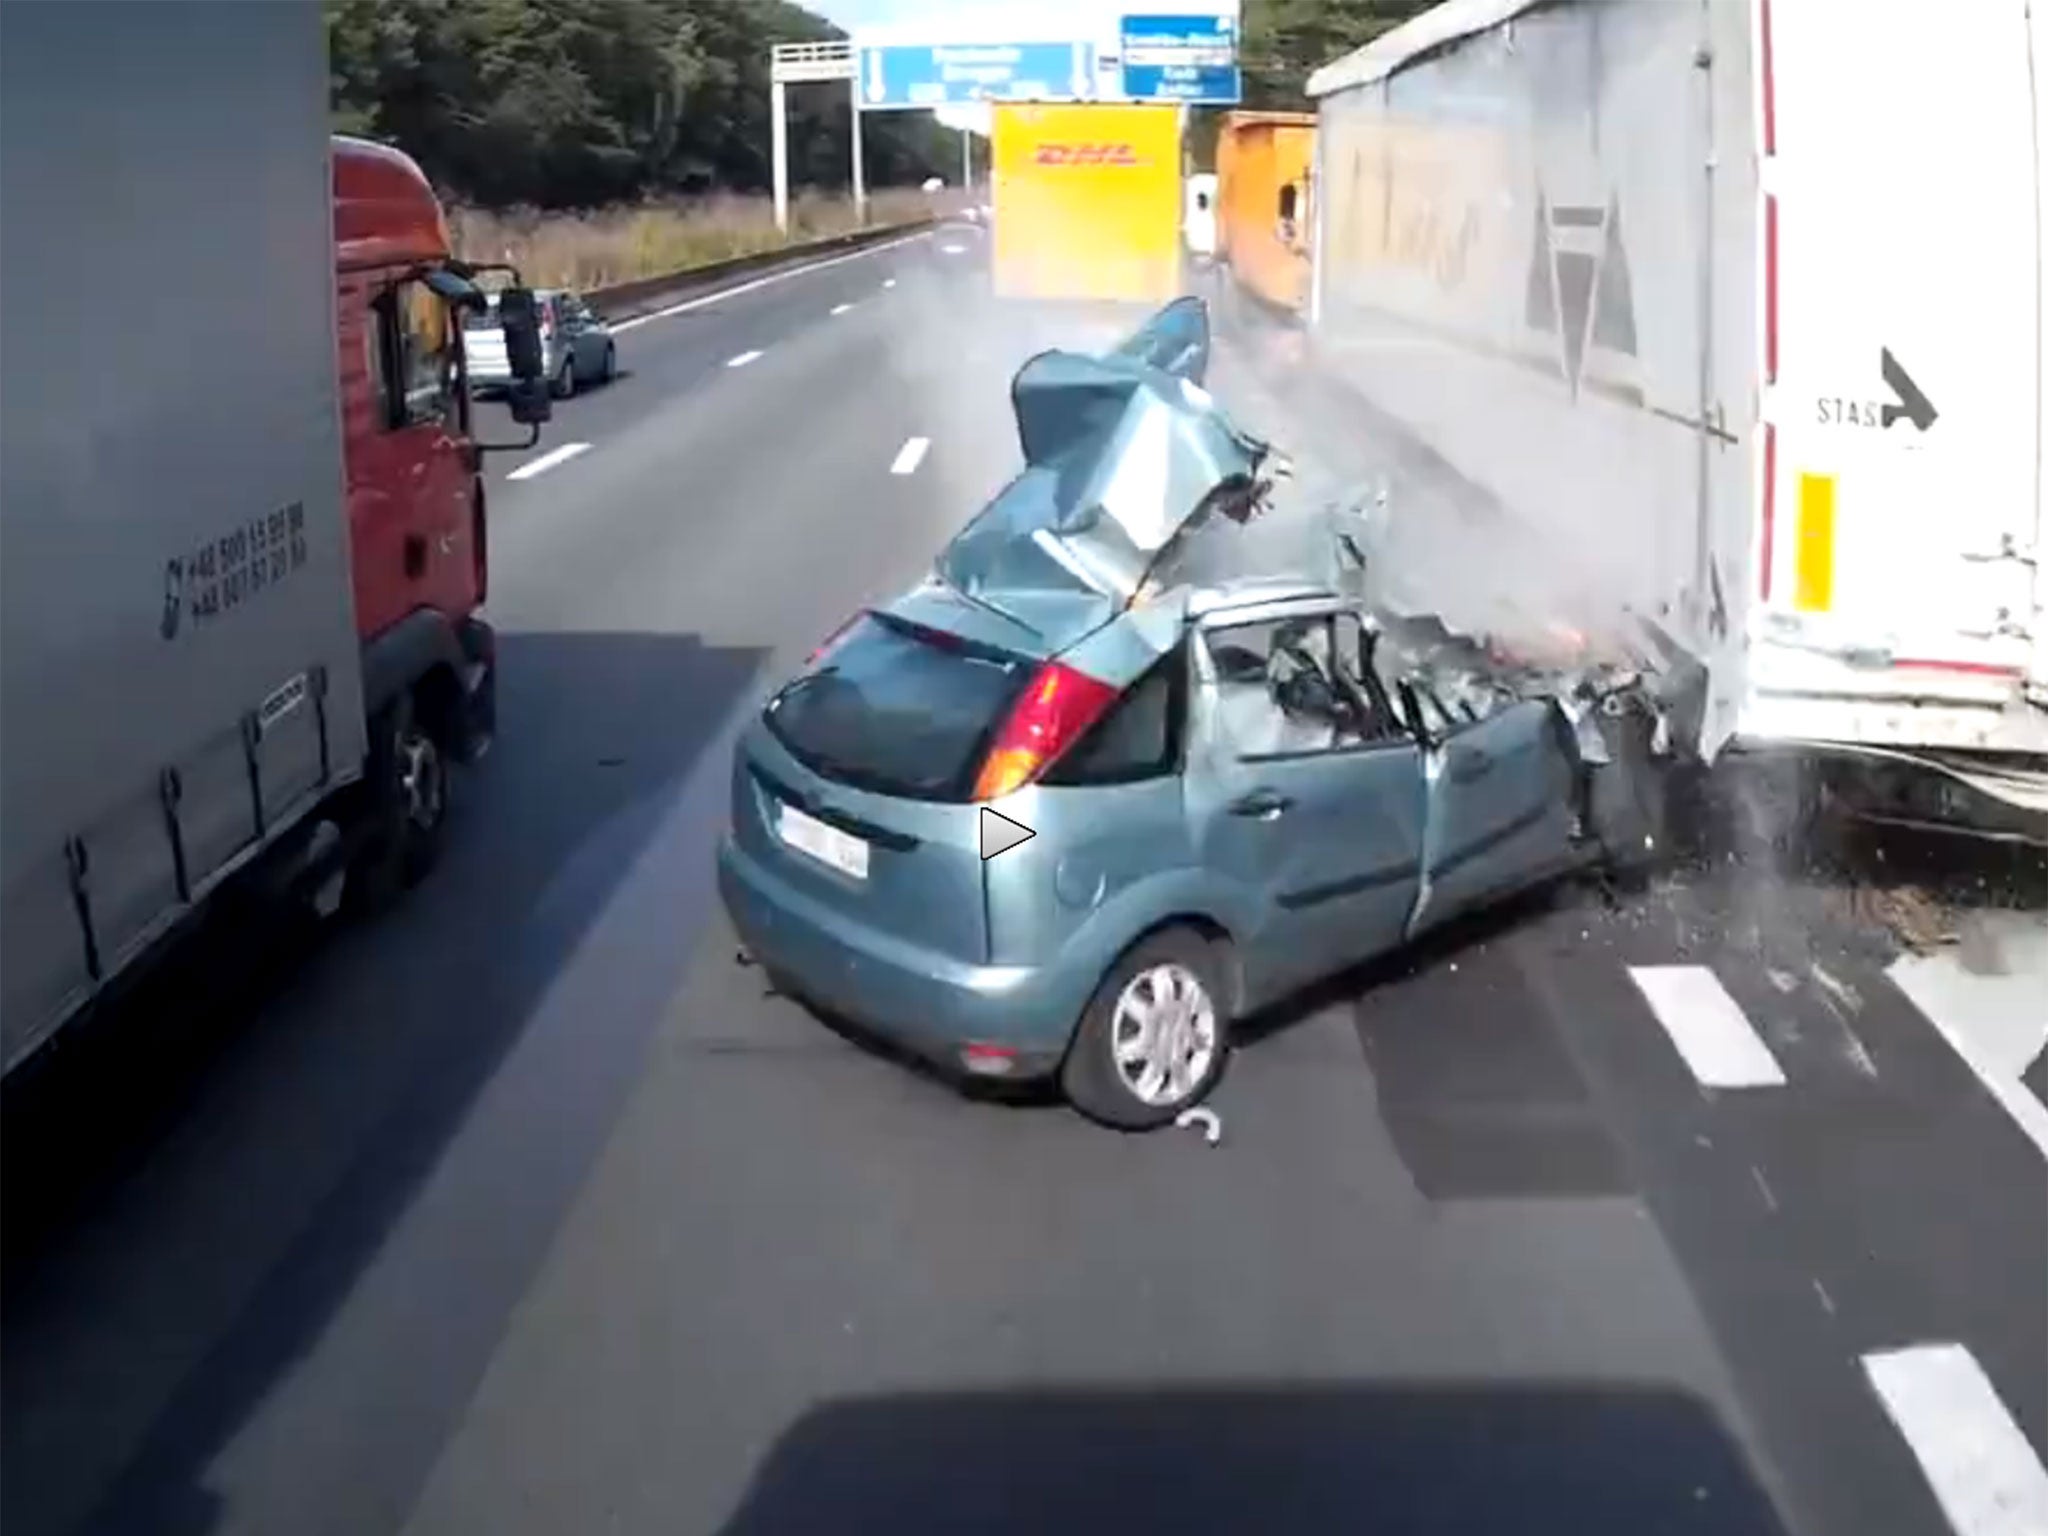 After watching this footage, it is astonishing to believe the driver managed to survive.